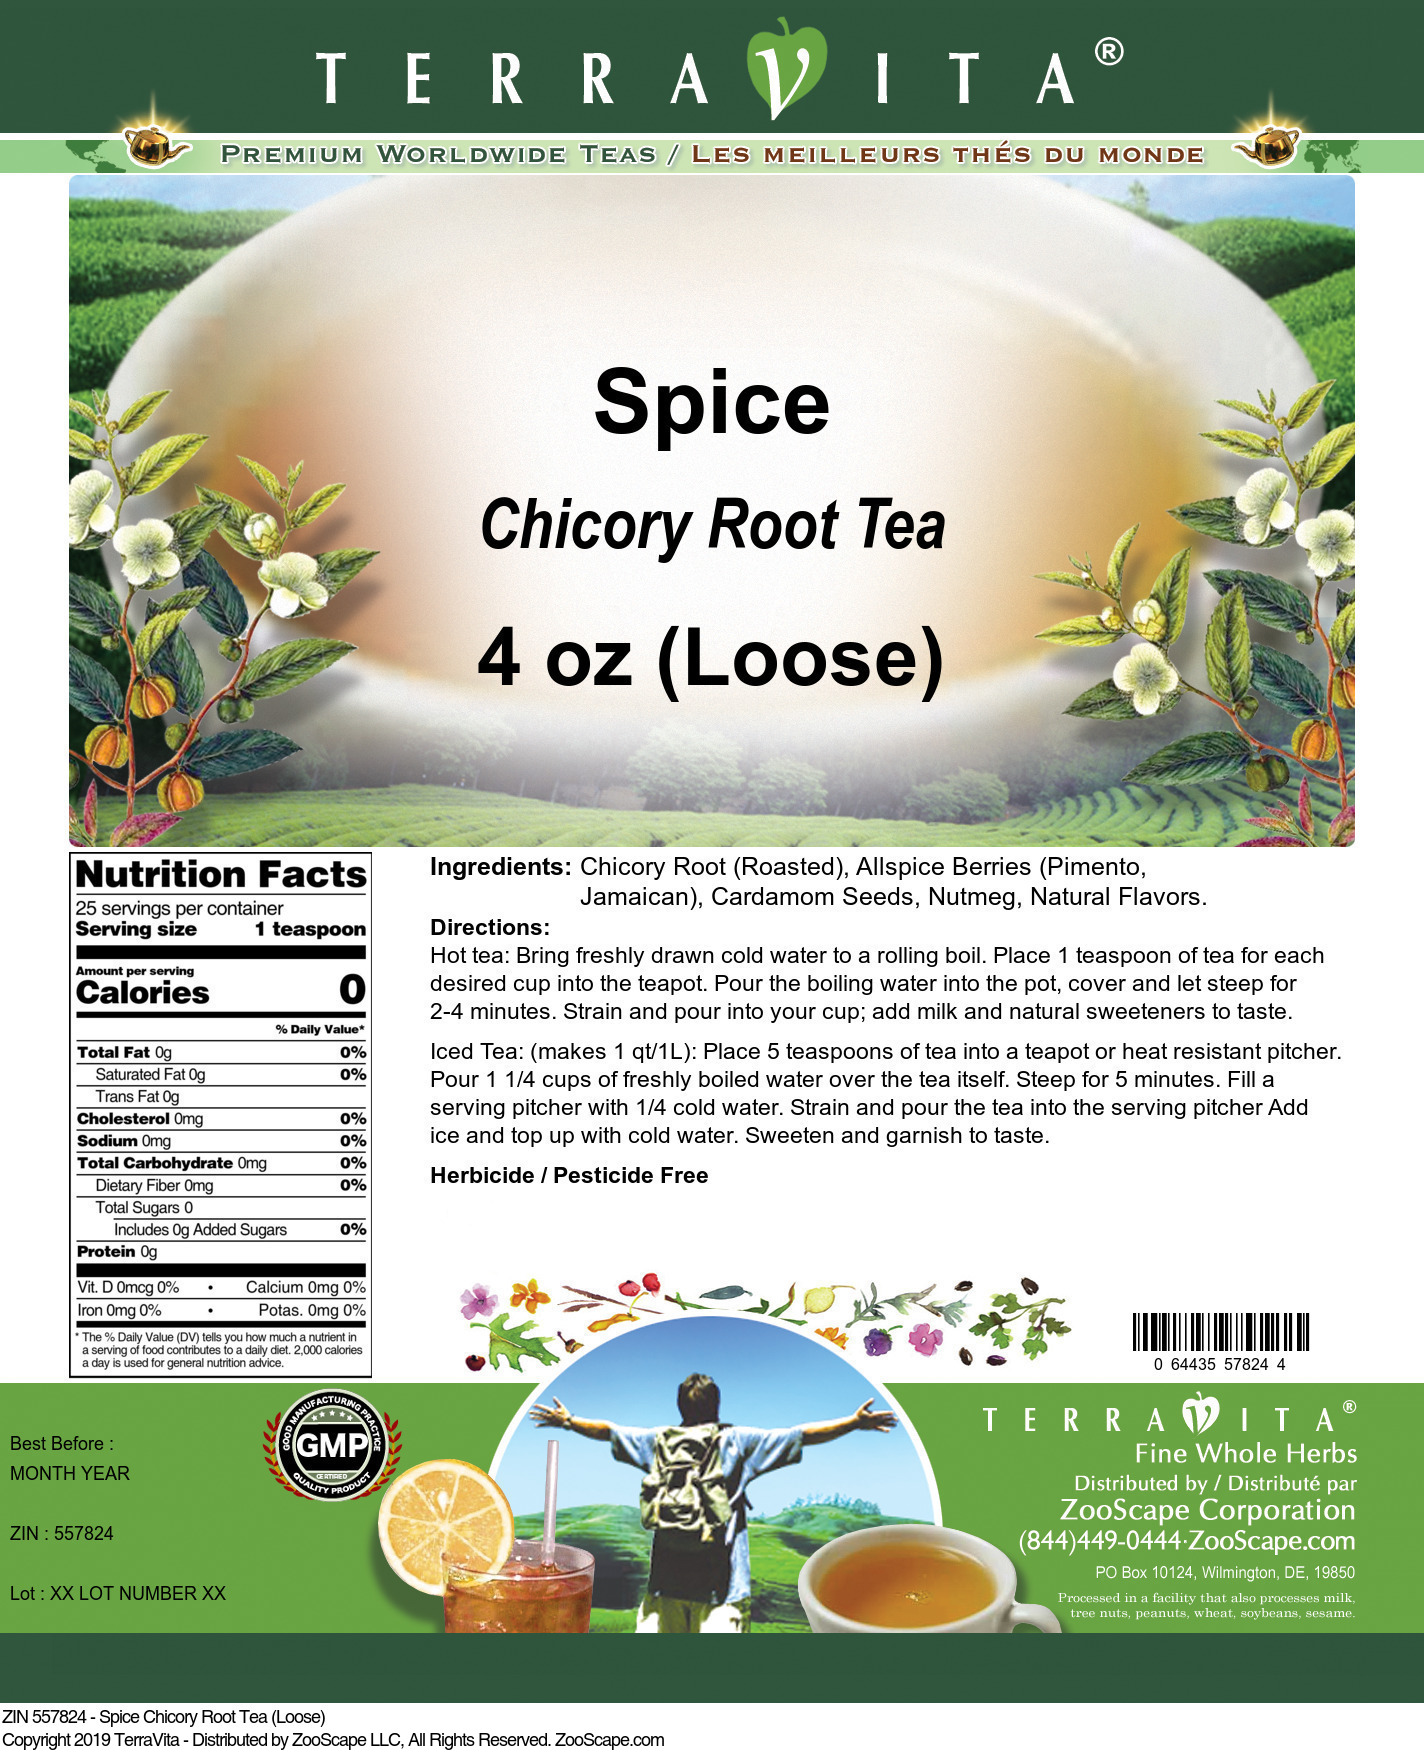 Spice Chicory Root Tea (Loose) - Label